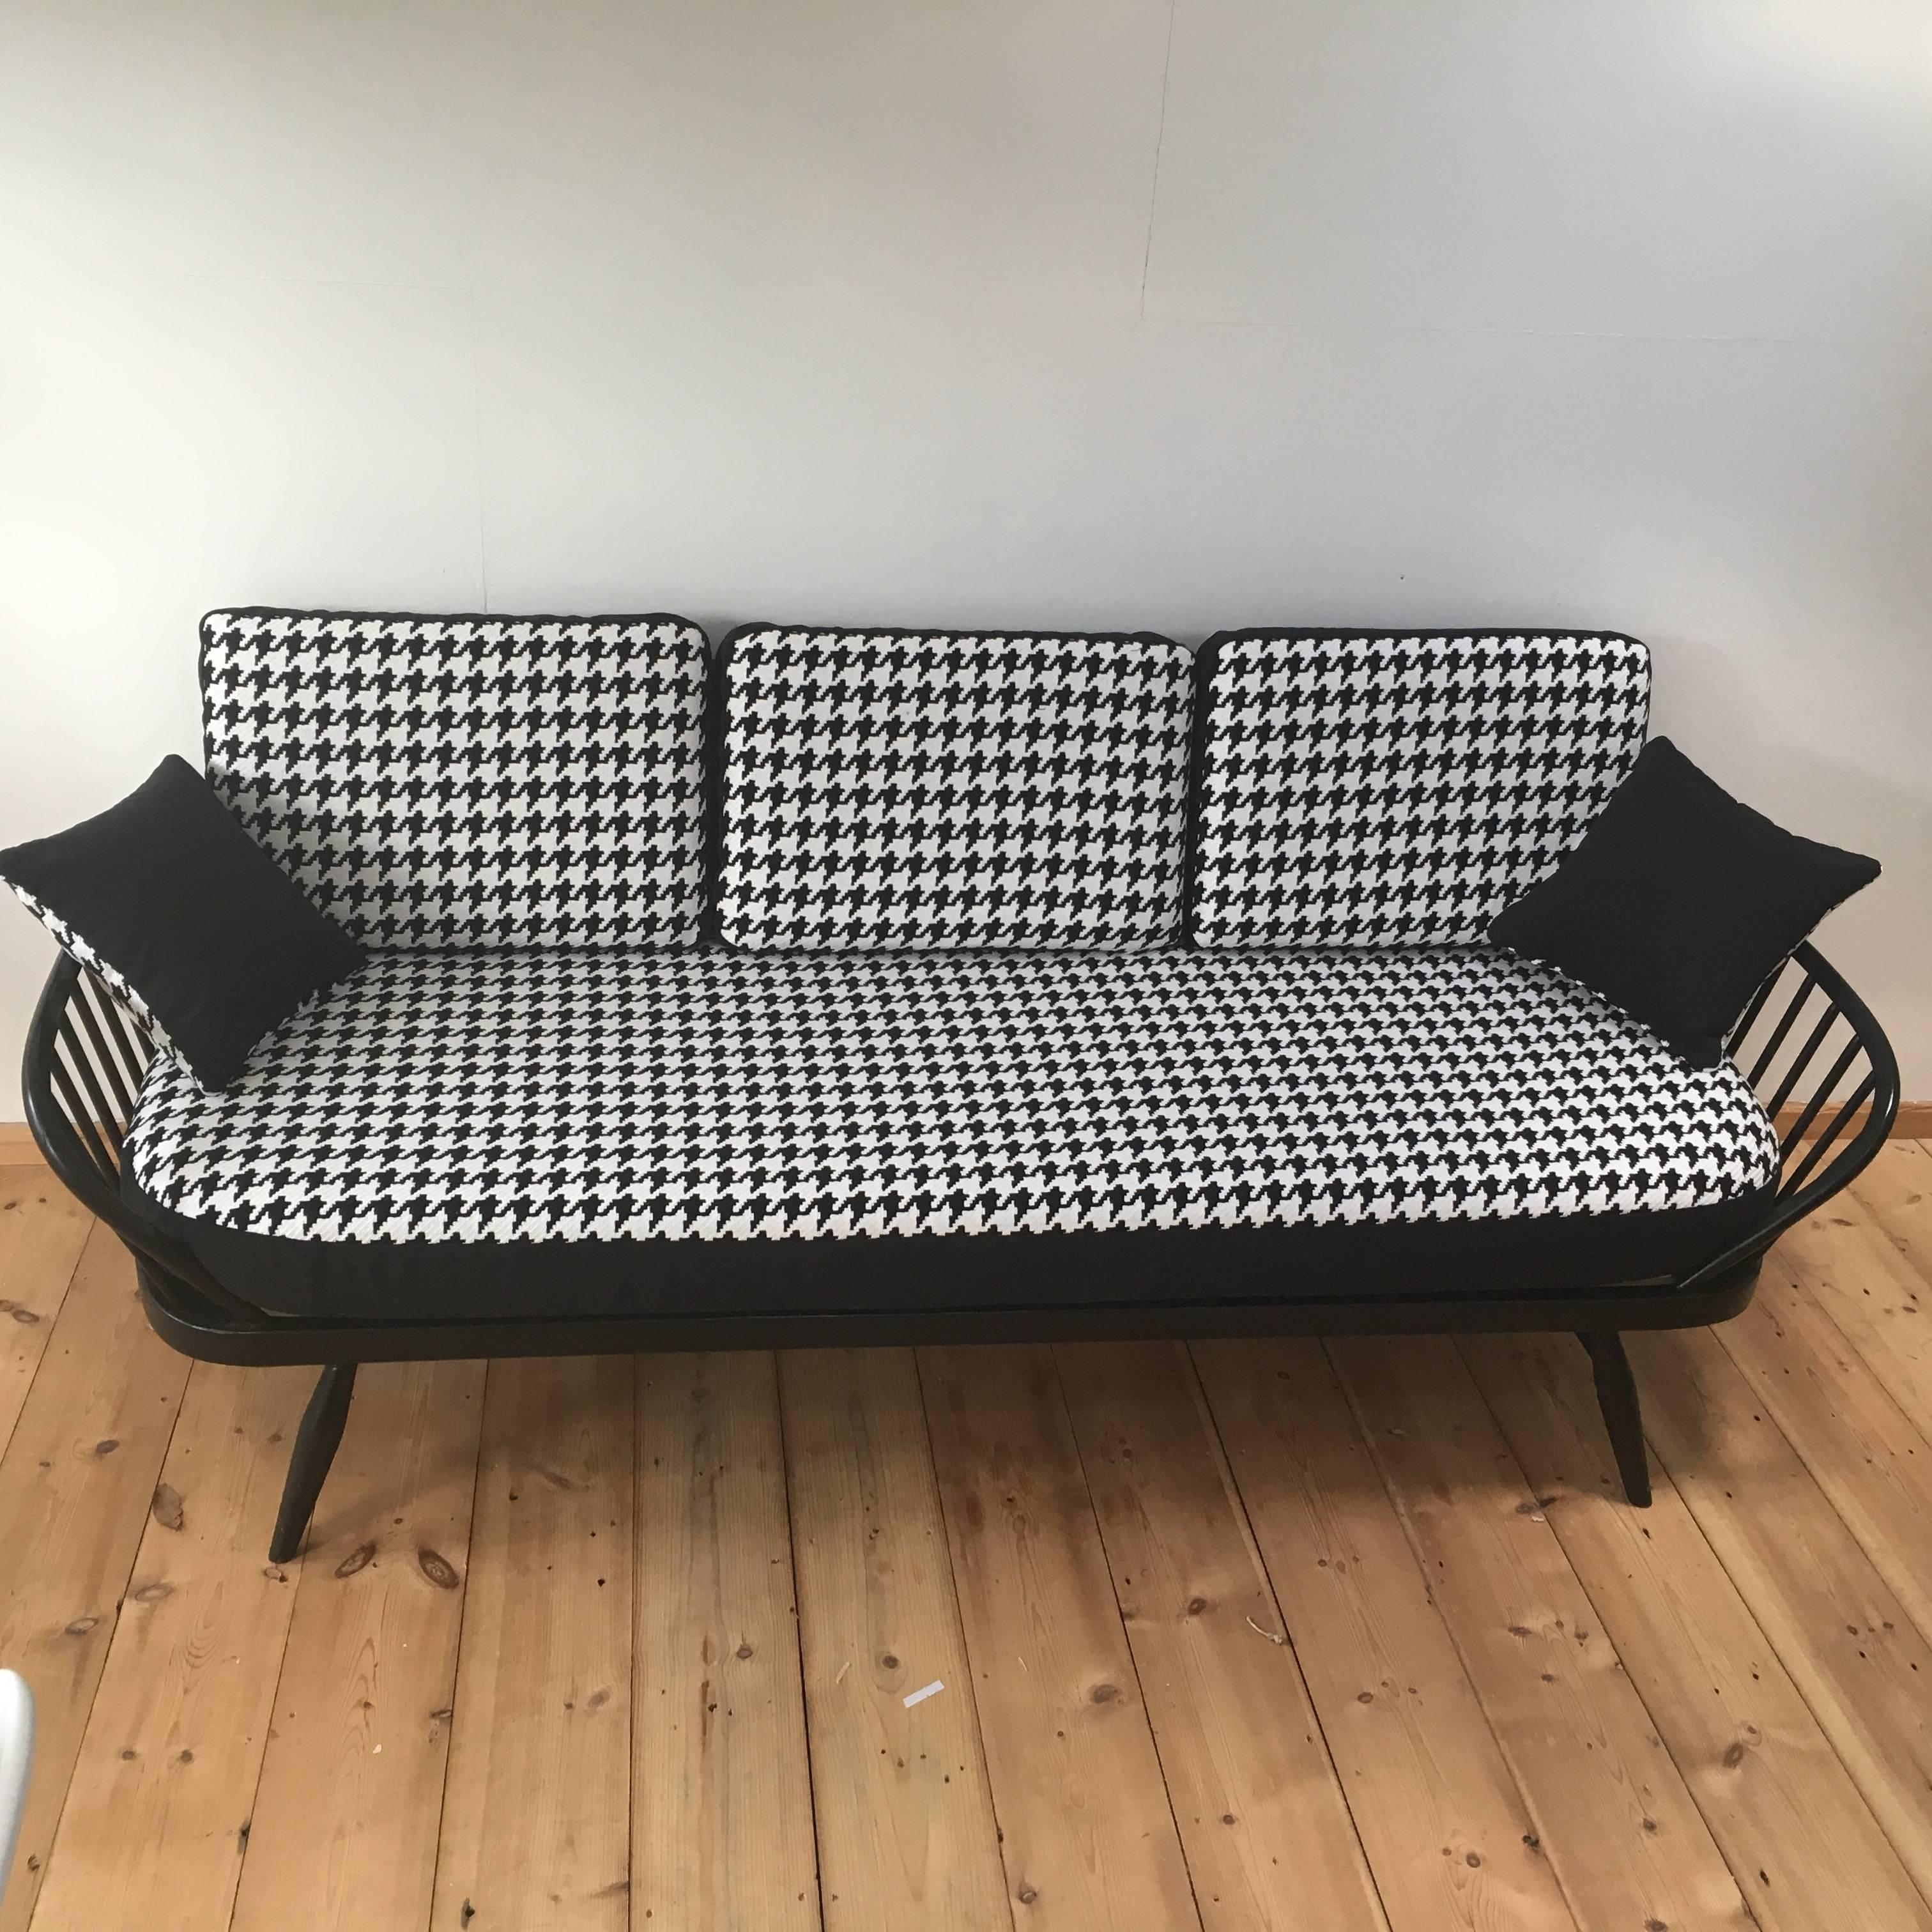 English Mid-Century Ercol Studio Couch Refurbished in Dog Tooth Check Fabric, 1950s For Sale